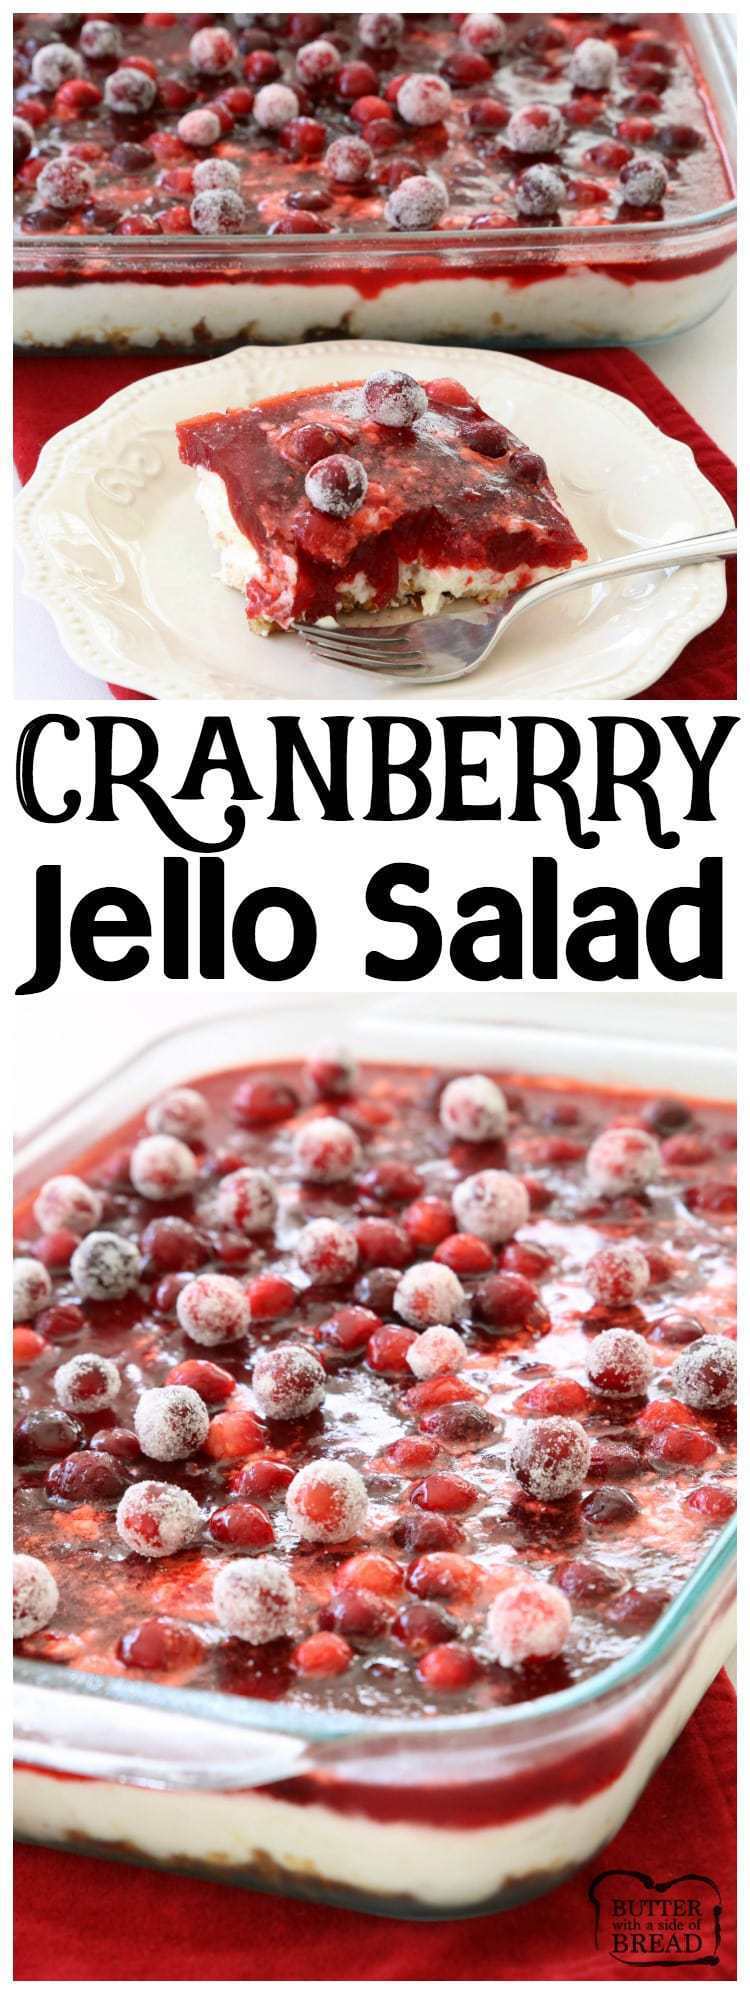 Cranberry Jello Salad made with 3 festive, delicious layers of pretzels, pudding, cranberries & Jello! Impressive, easy addition to your #holiday #dinner. #Cranberry #Jello #Salad recipe perfect for #Thanksgiving and #Christmas from Butter With A Side of Bread